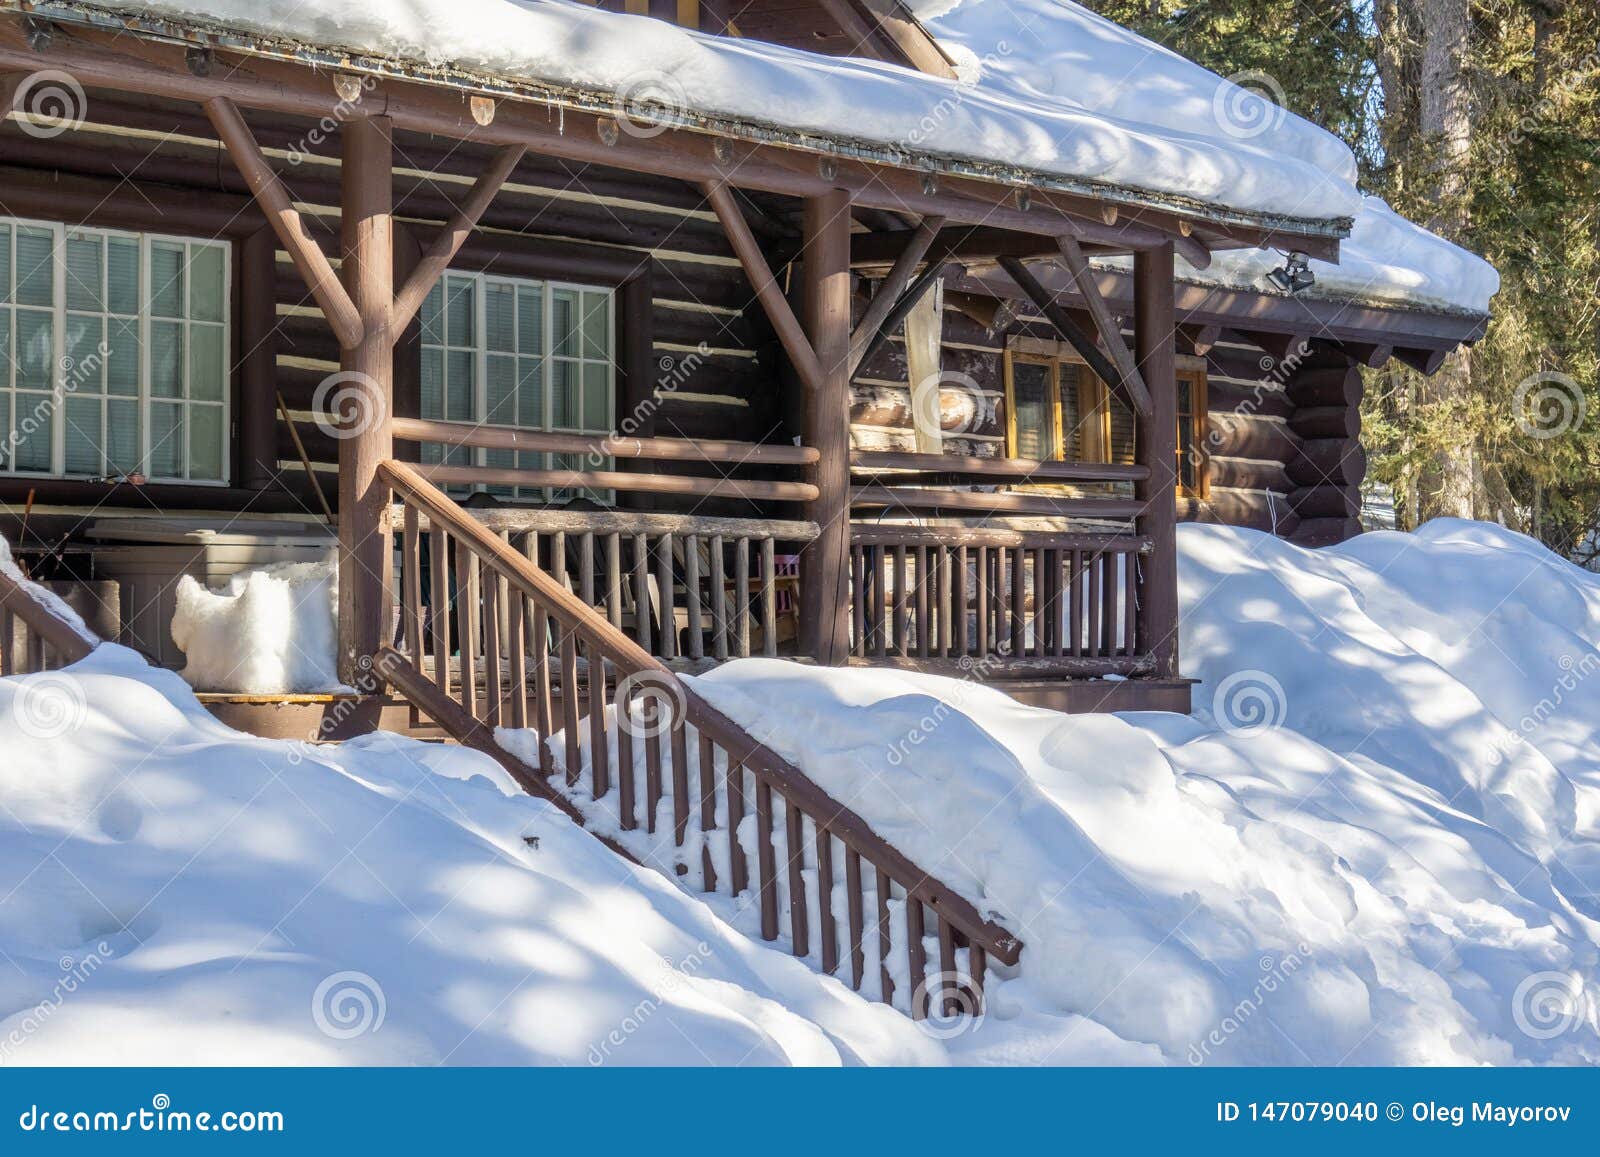 Wooden House Covered in Snow in the Early Spring Woods Alberta Canada Stock  Photo - Image of rural, cozy: 147079040